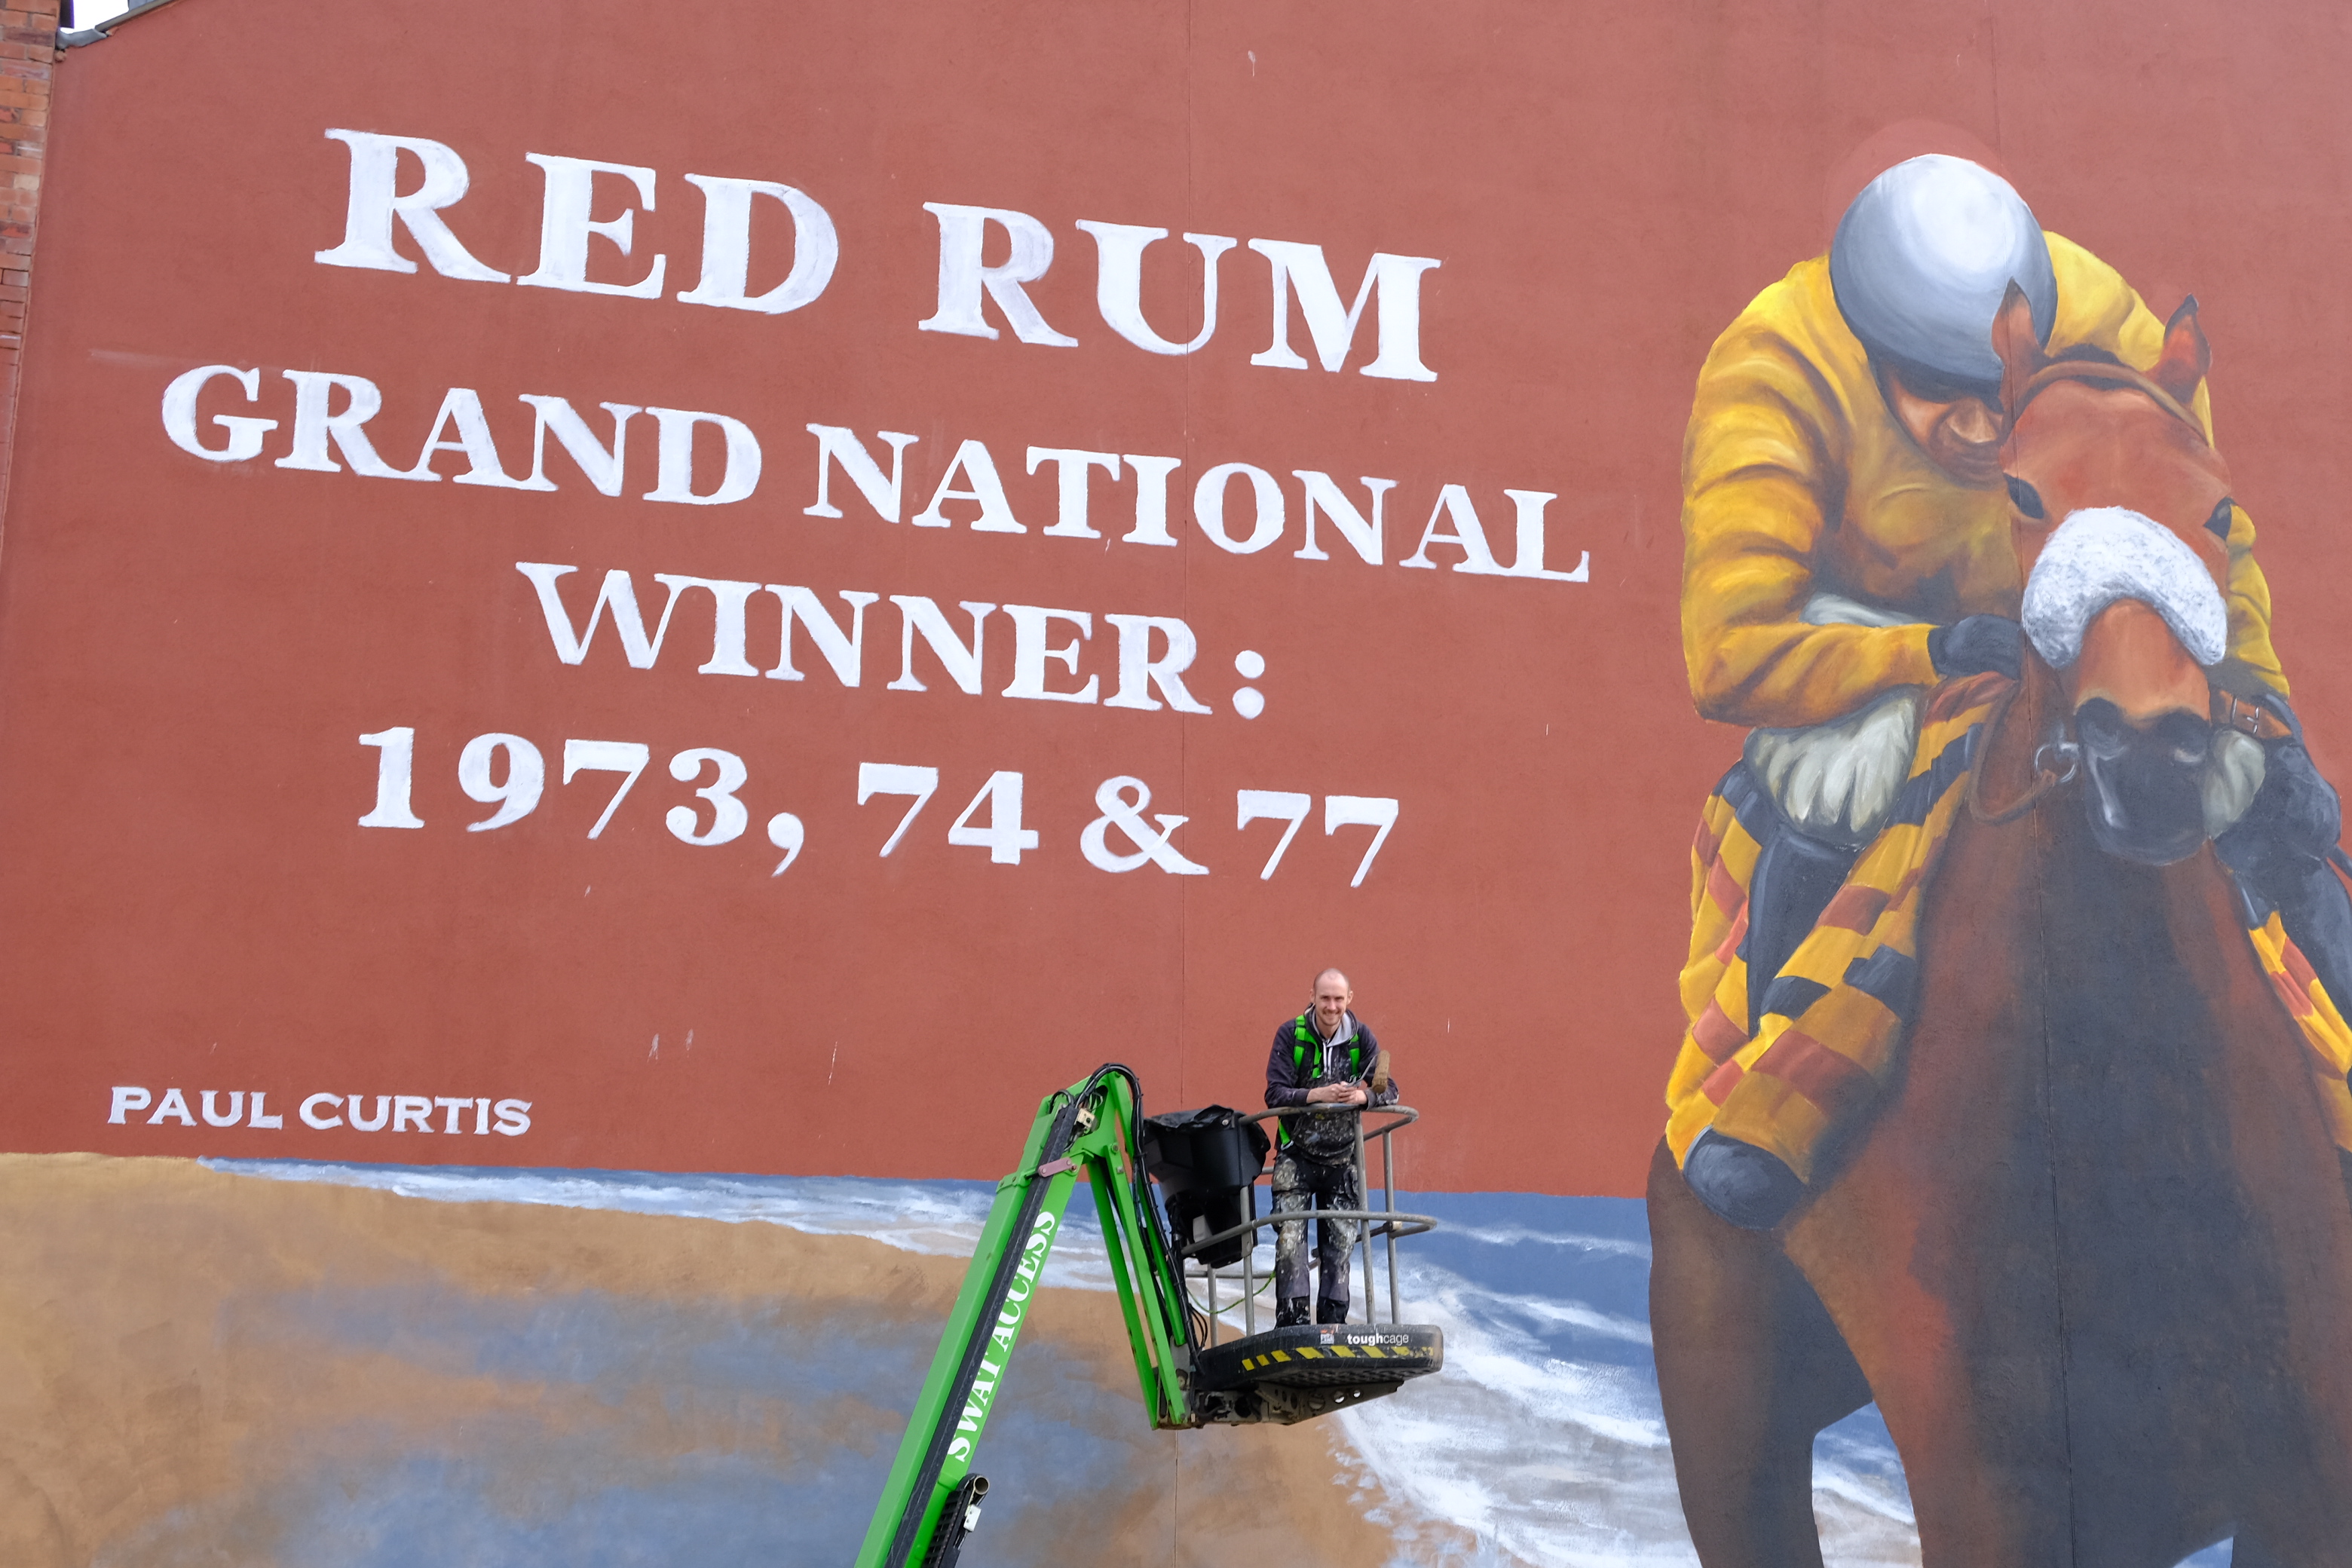 Liverpool mural artist Paul Curtis and the huge Red Rum artwork in Southport